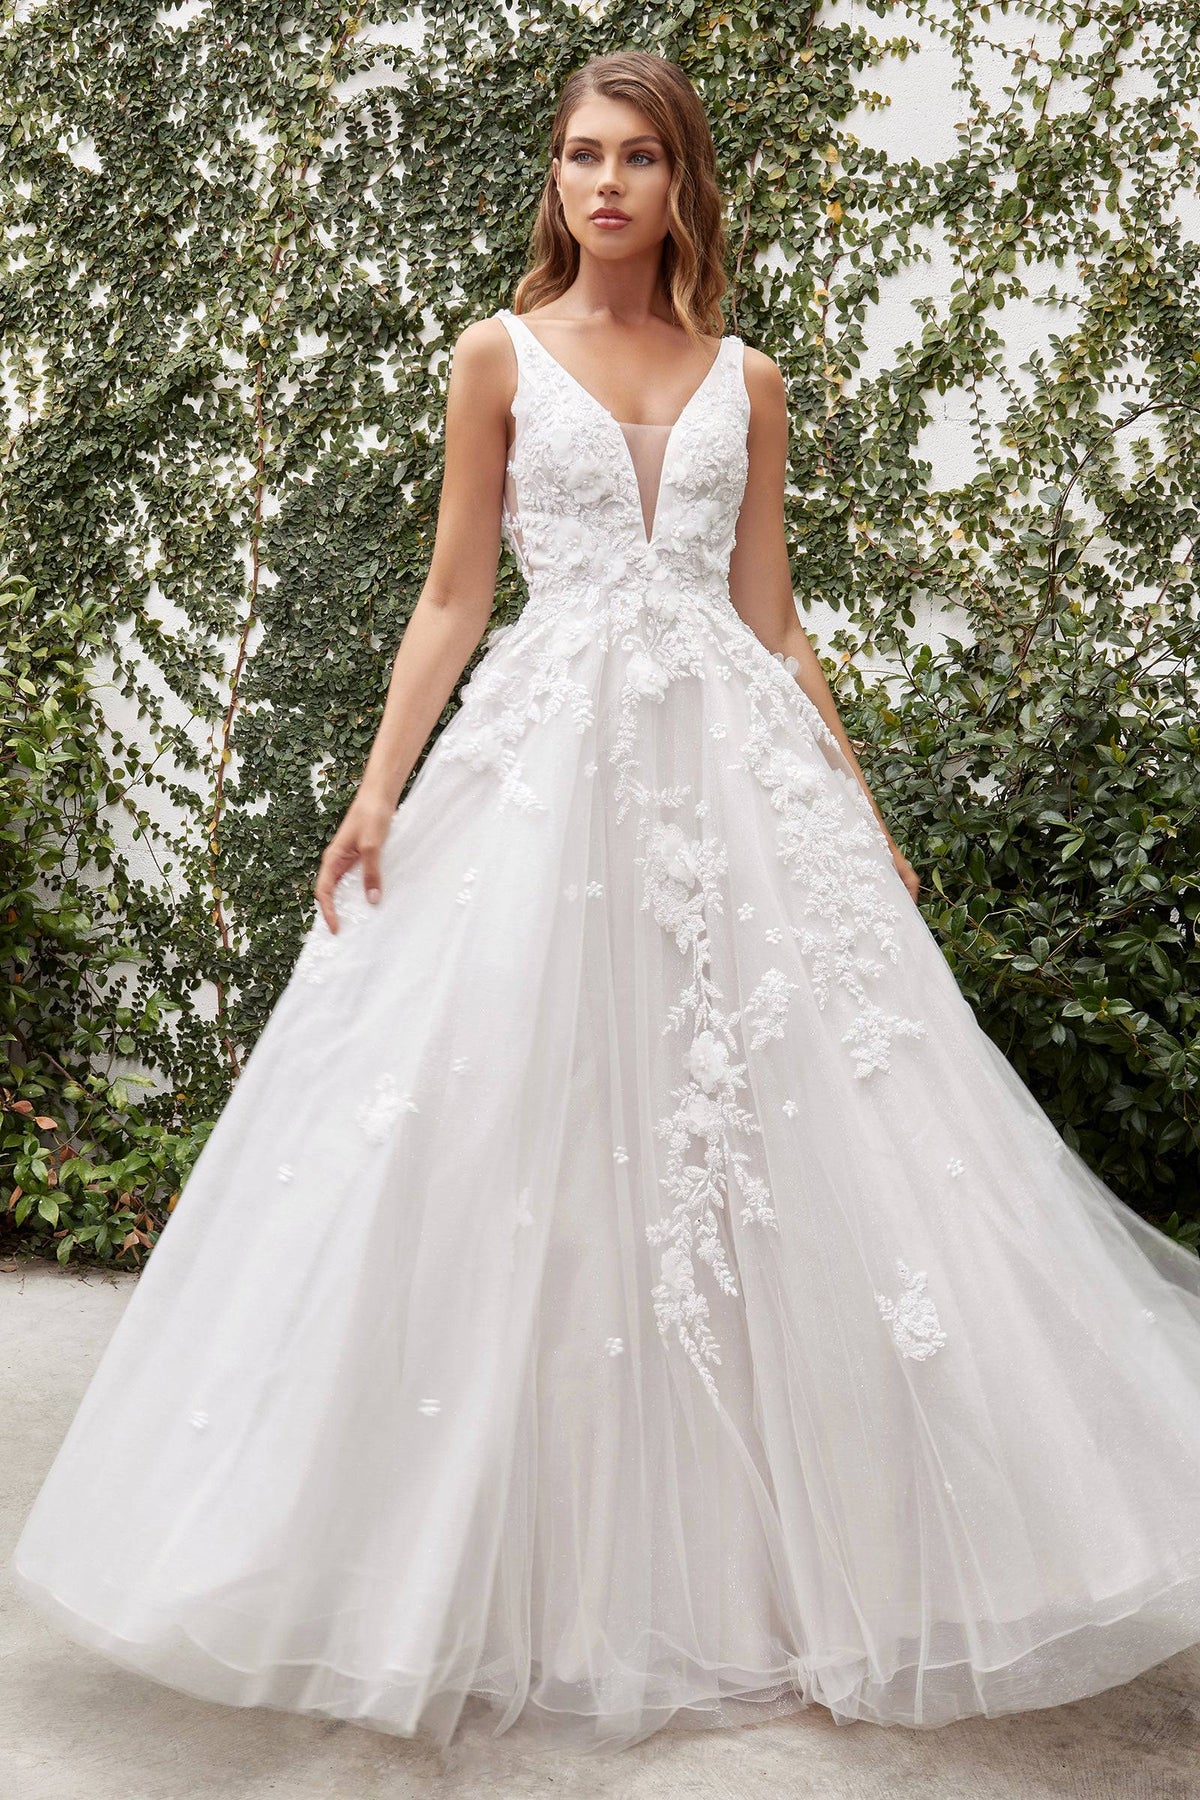 Wedding Dresses in Canada ⭐ Shop Best Bridal Gowns Online in